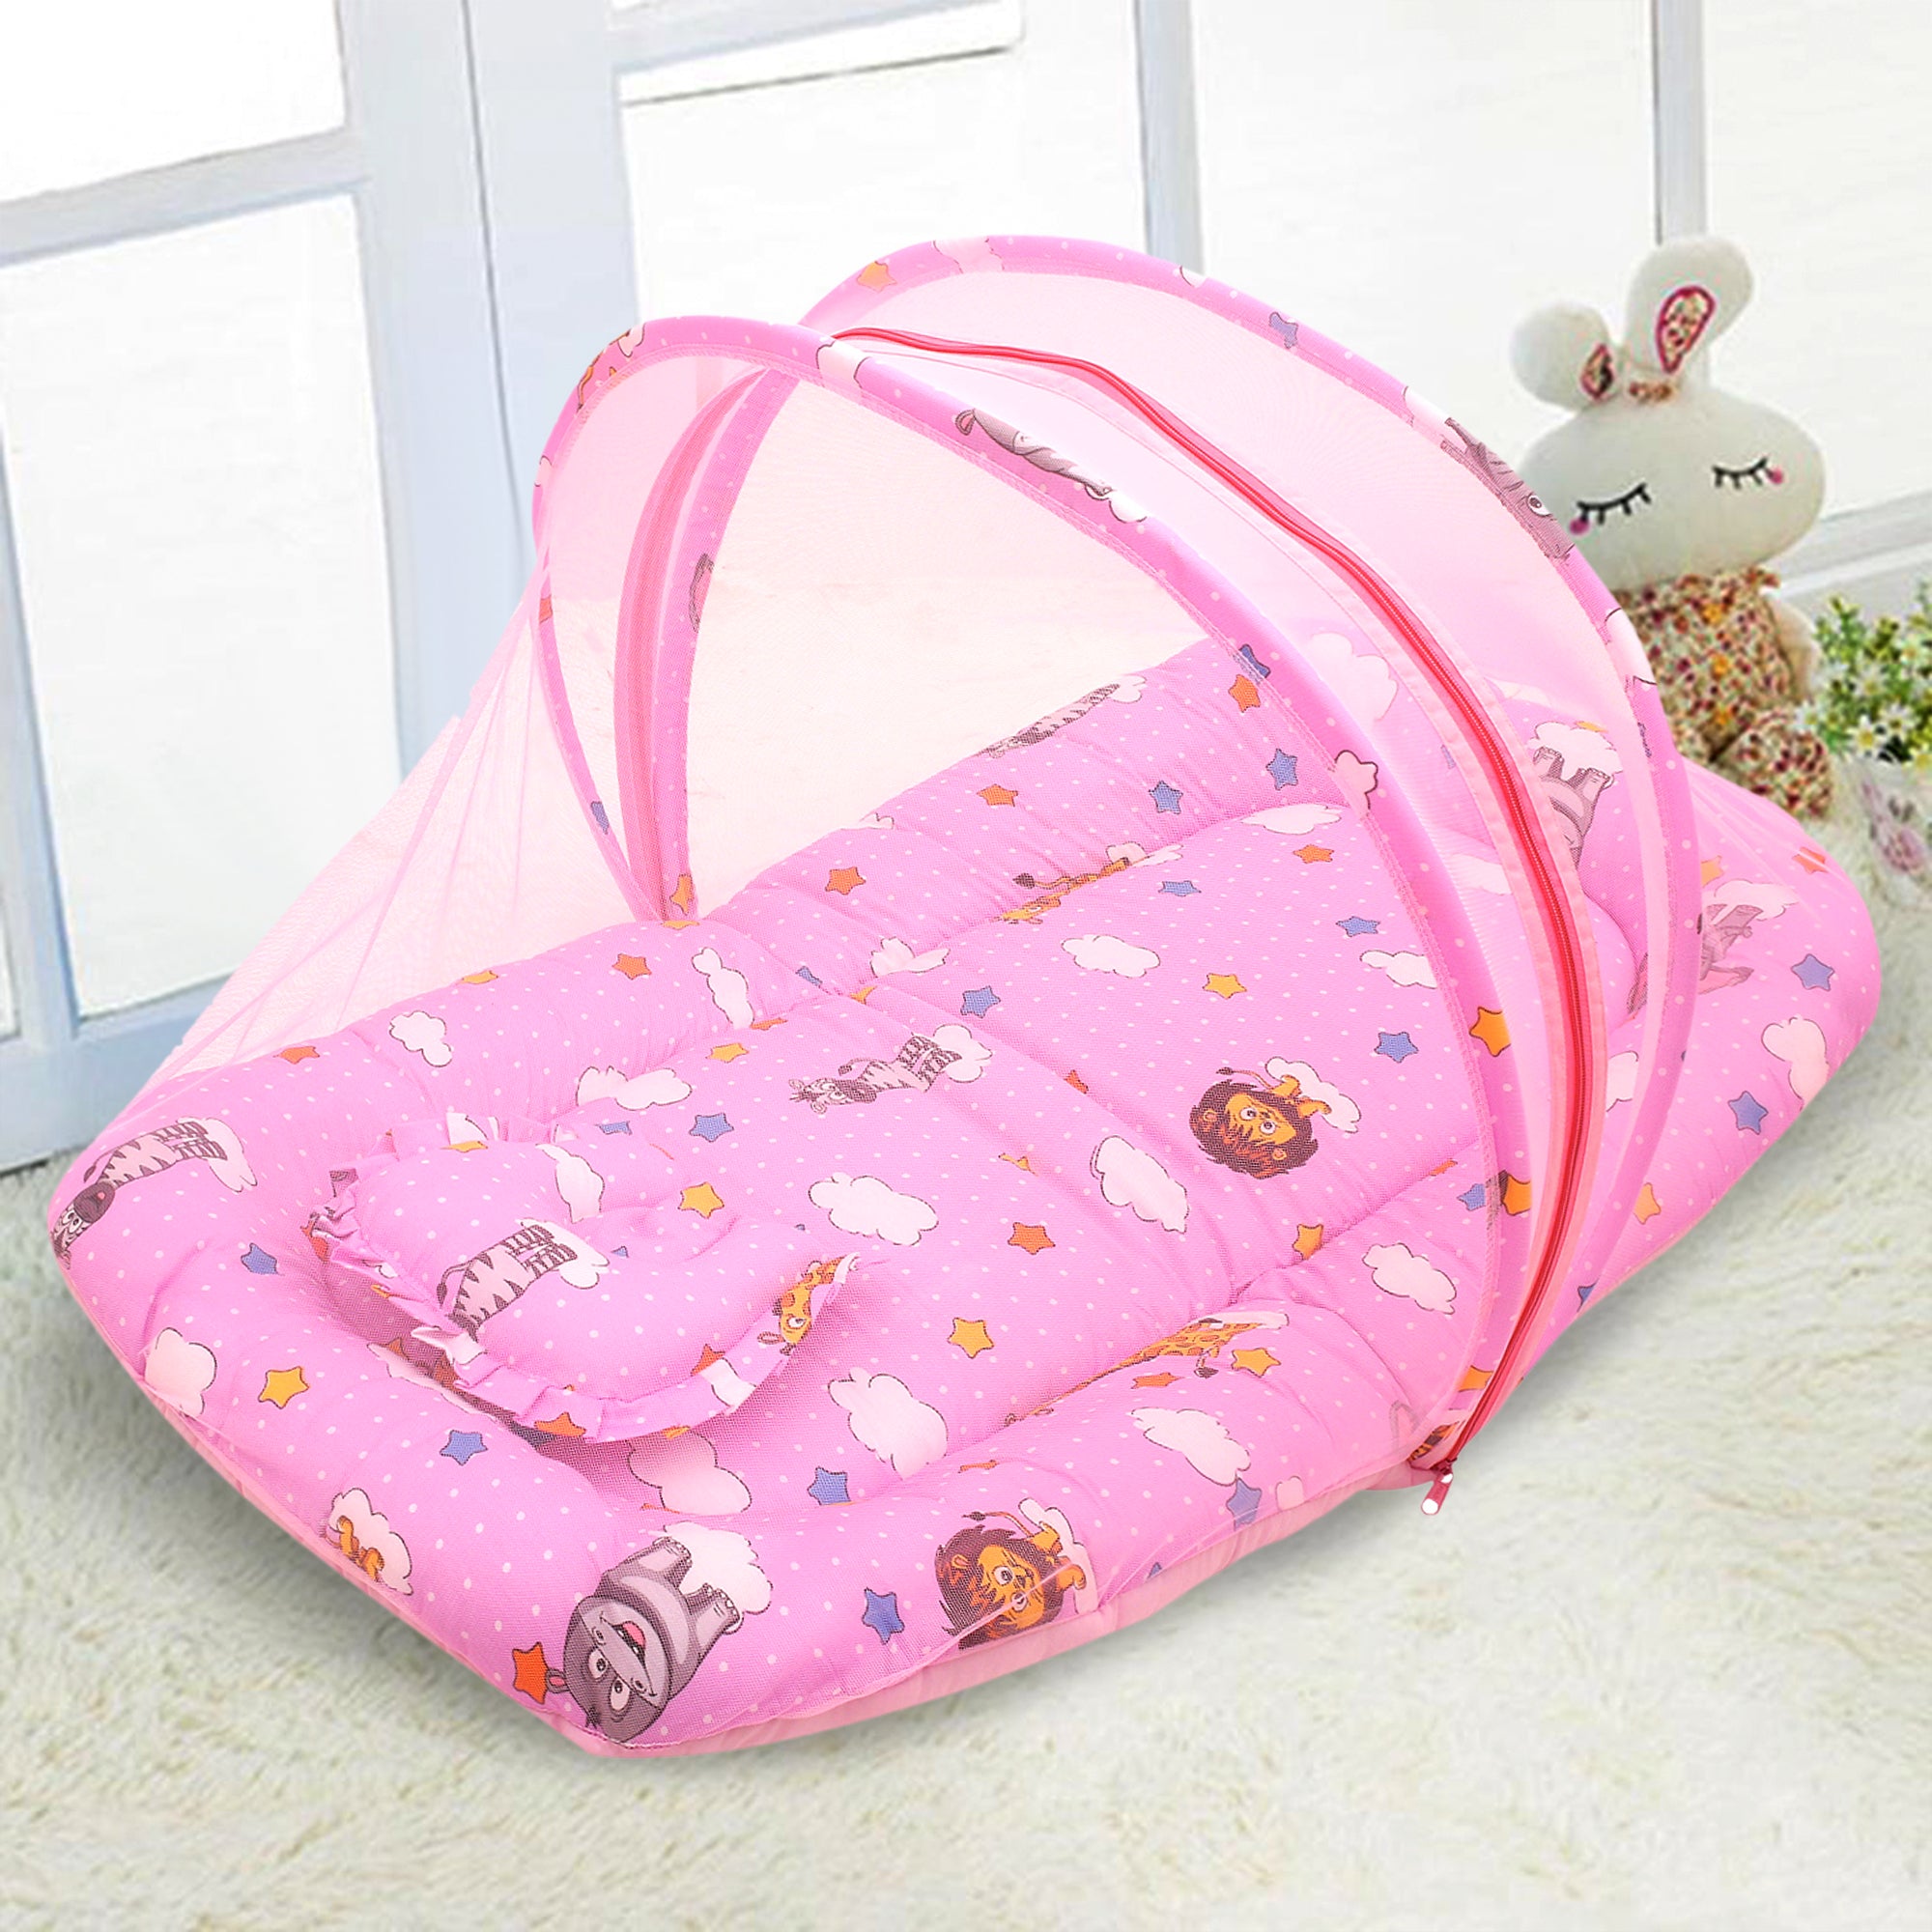 Mosquito Net Tent Mattress Set With Neck Pillow Flying Animals Pink - Baby Moo